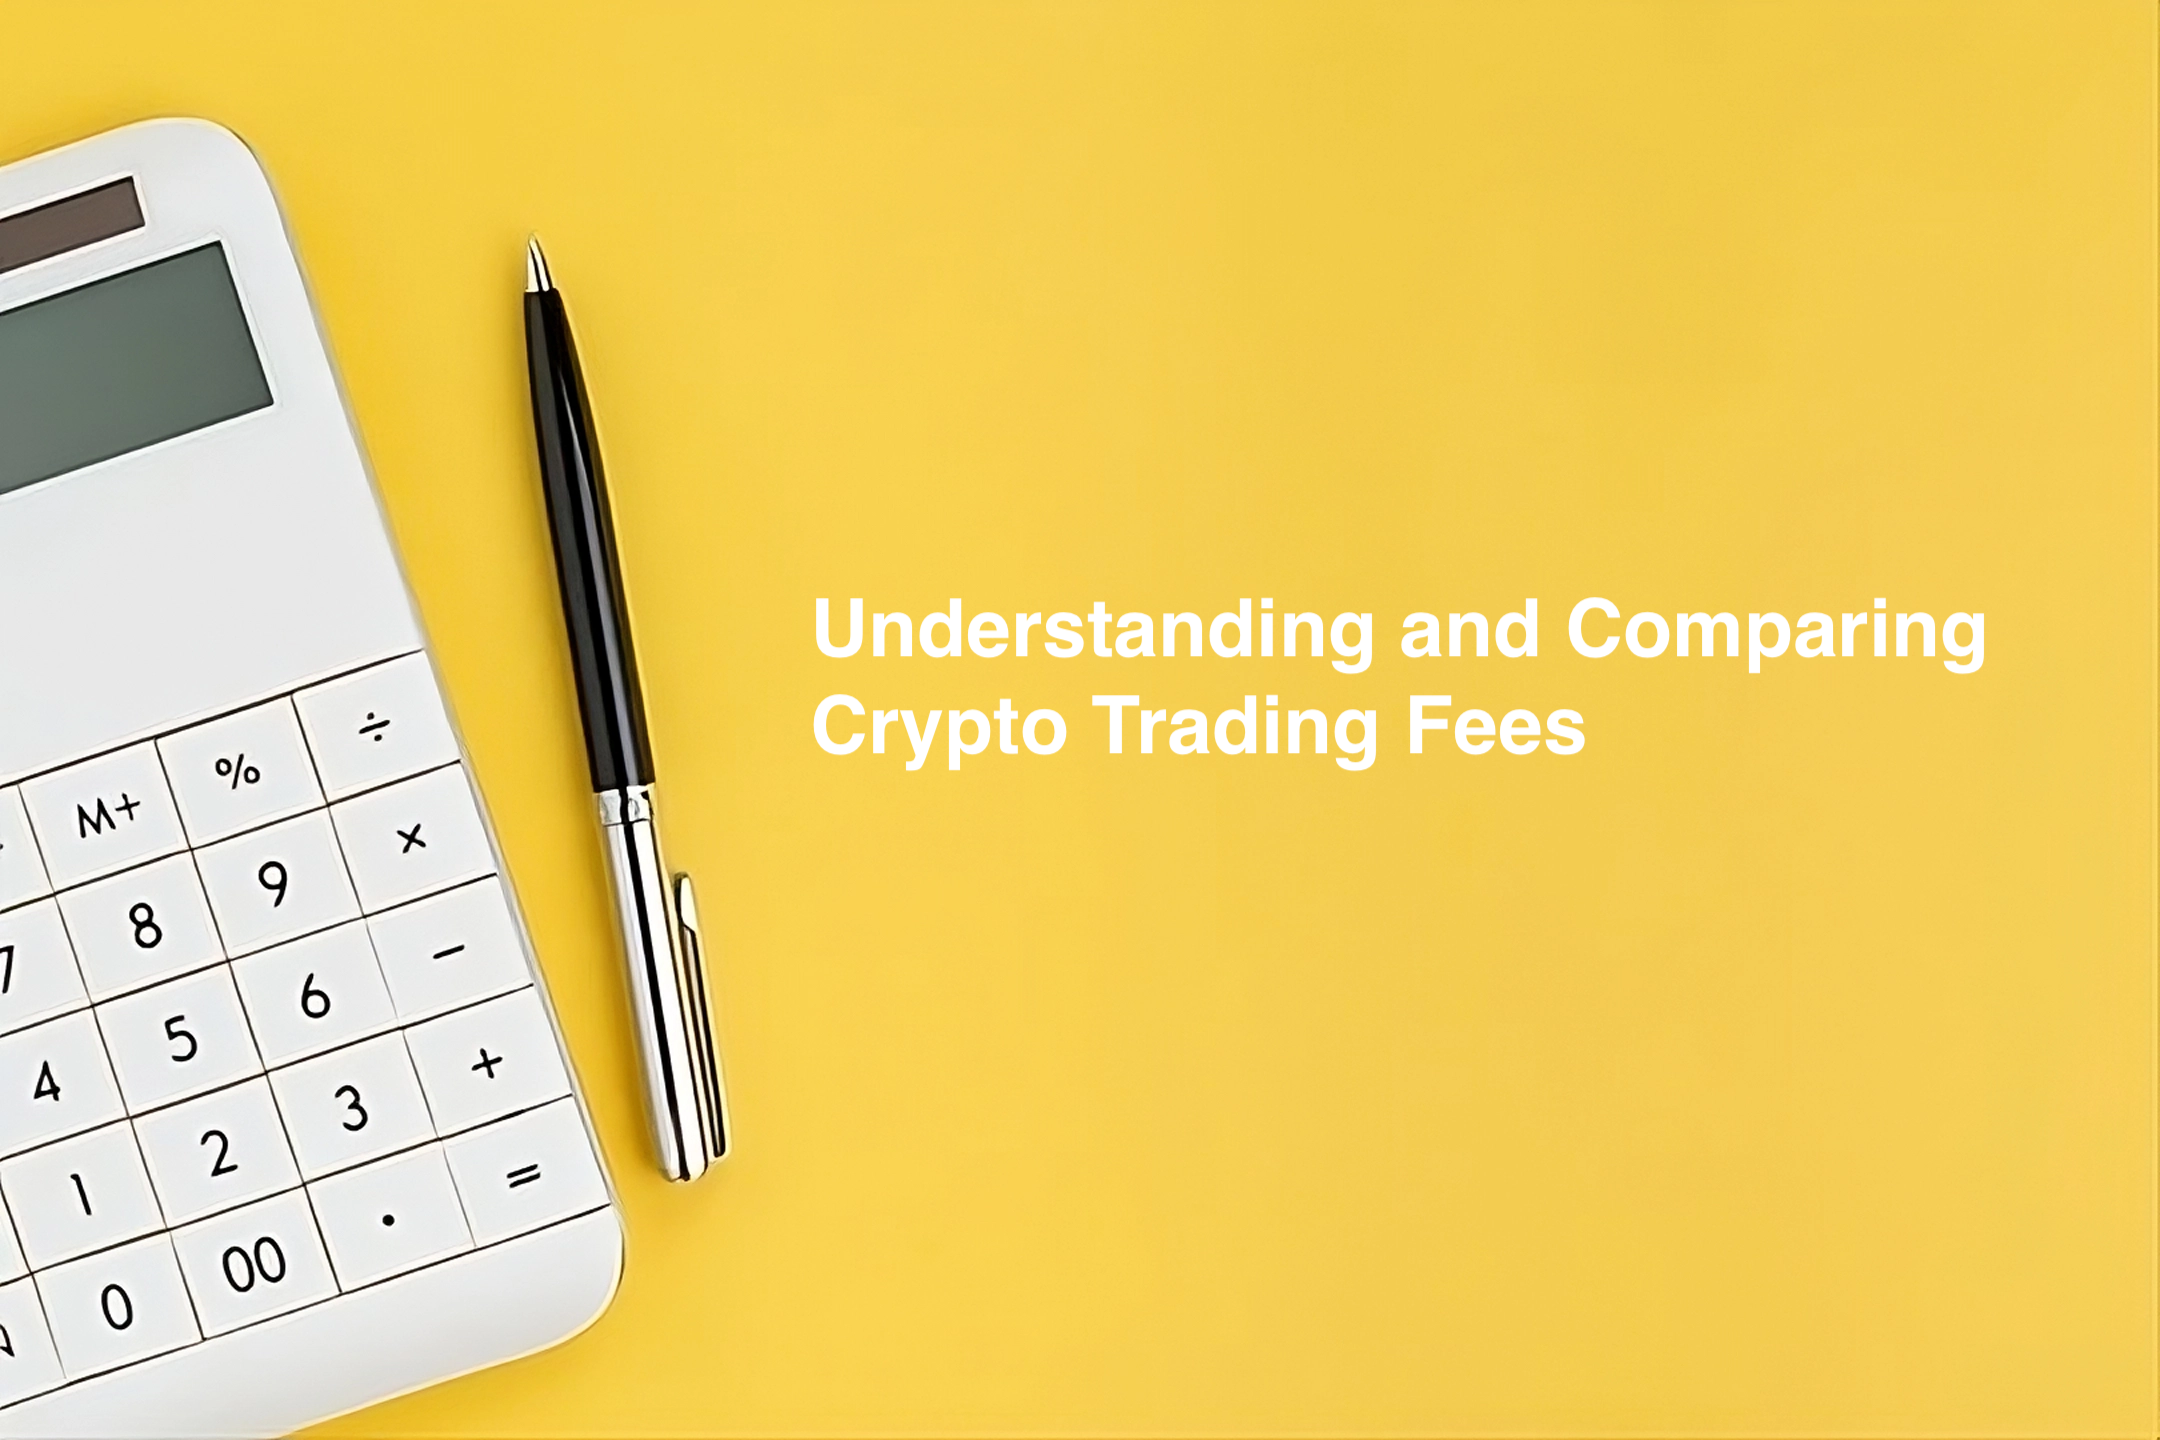 Understanding and Comparing Crypto Trading Fees